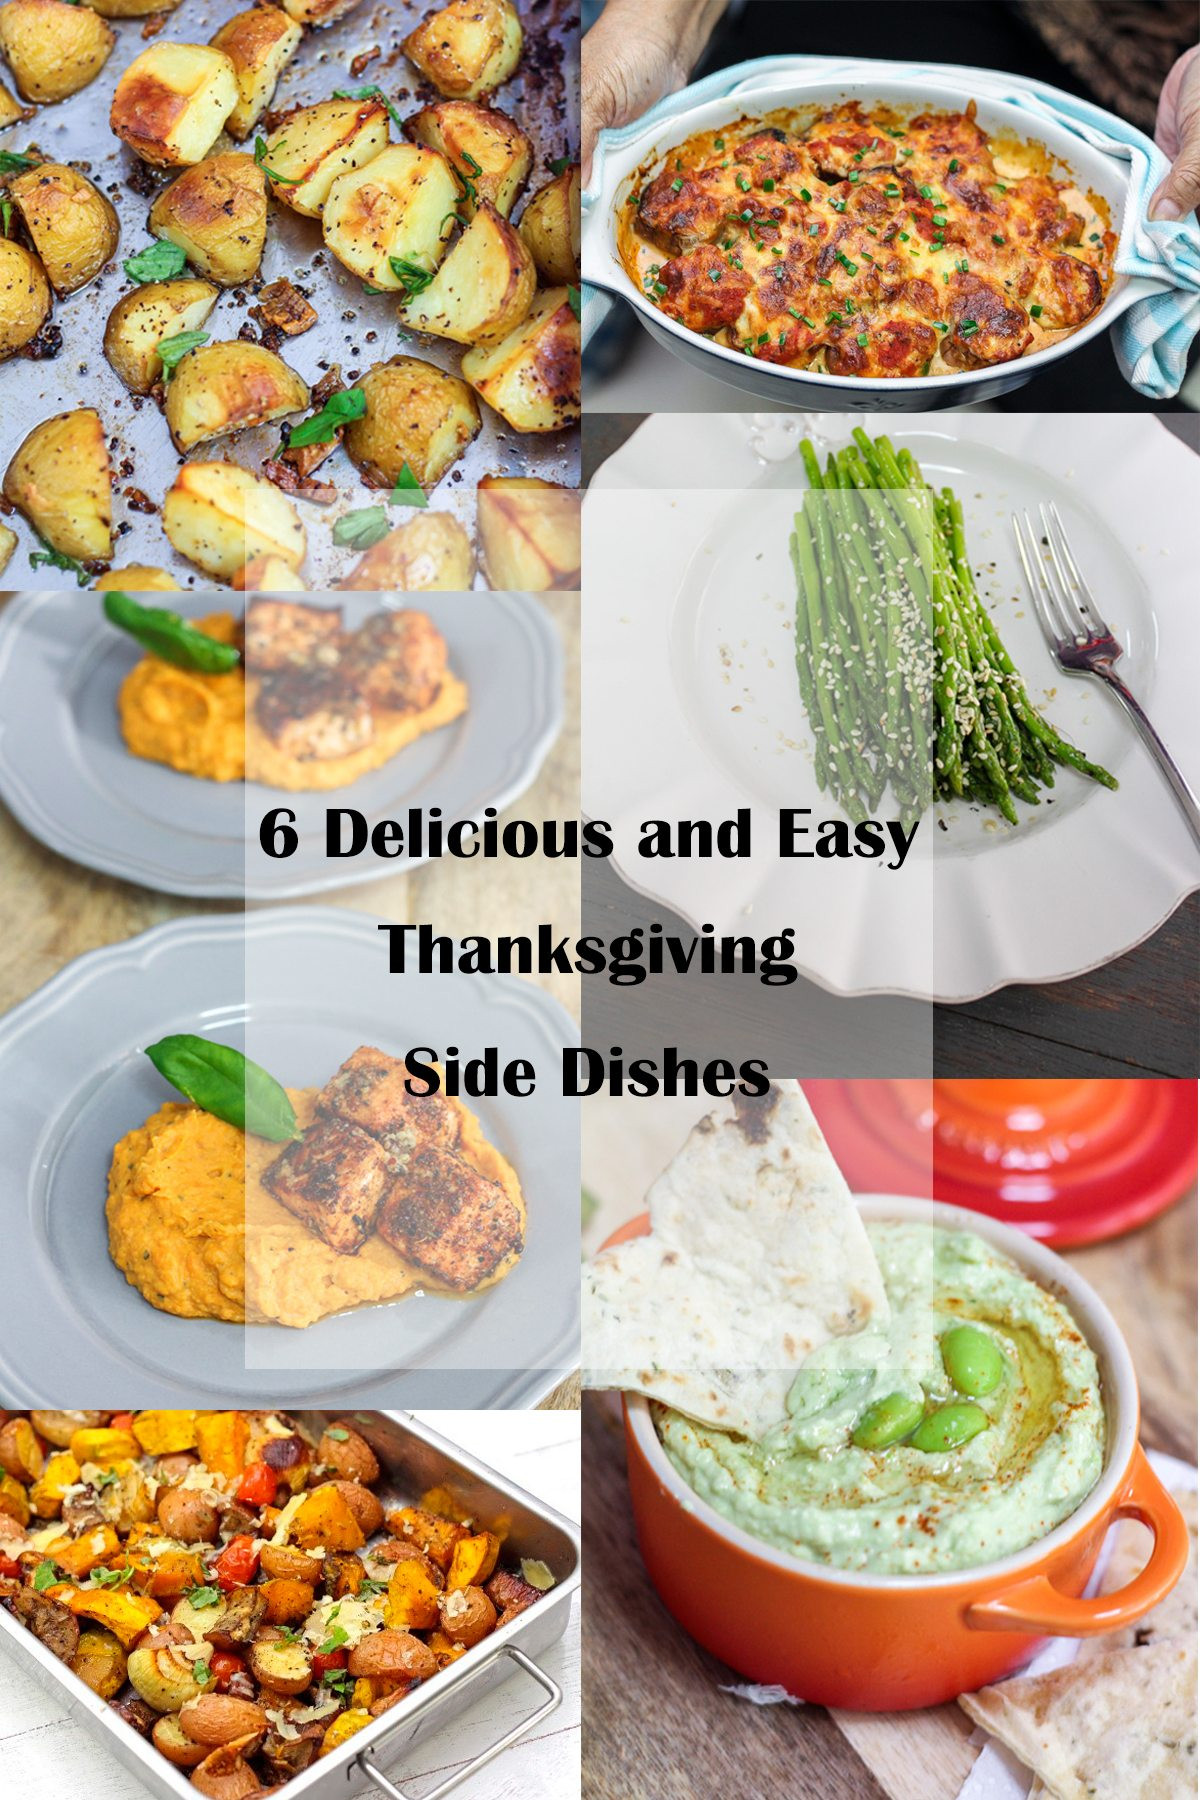 Yummy Side Dishes
 6 Delicious and Easy Thanksgiving Side Dishes